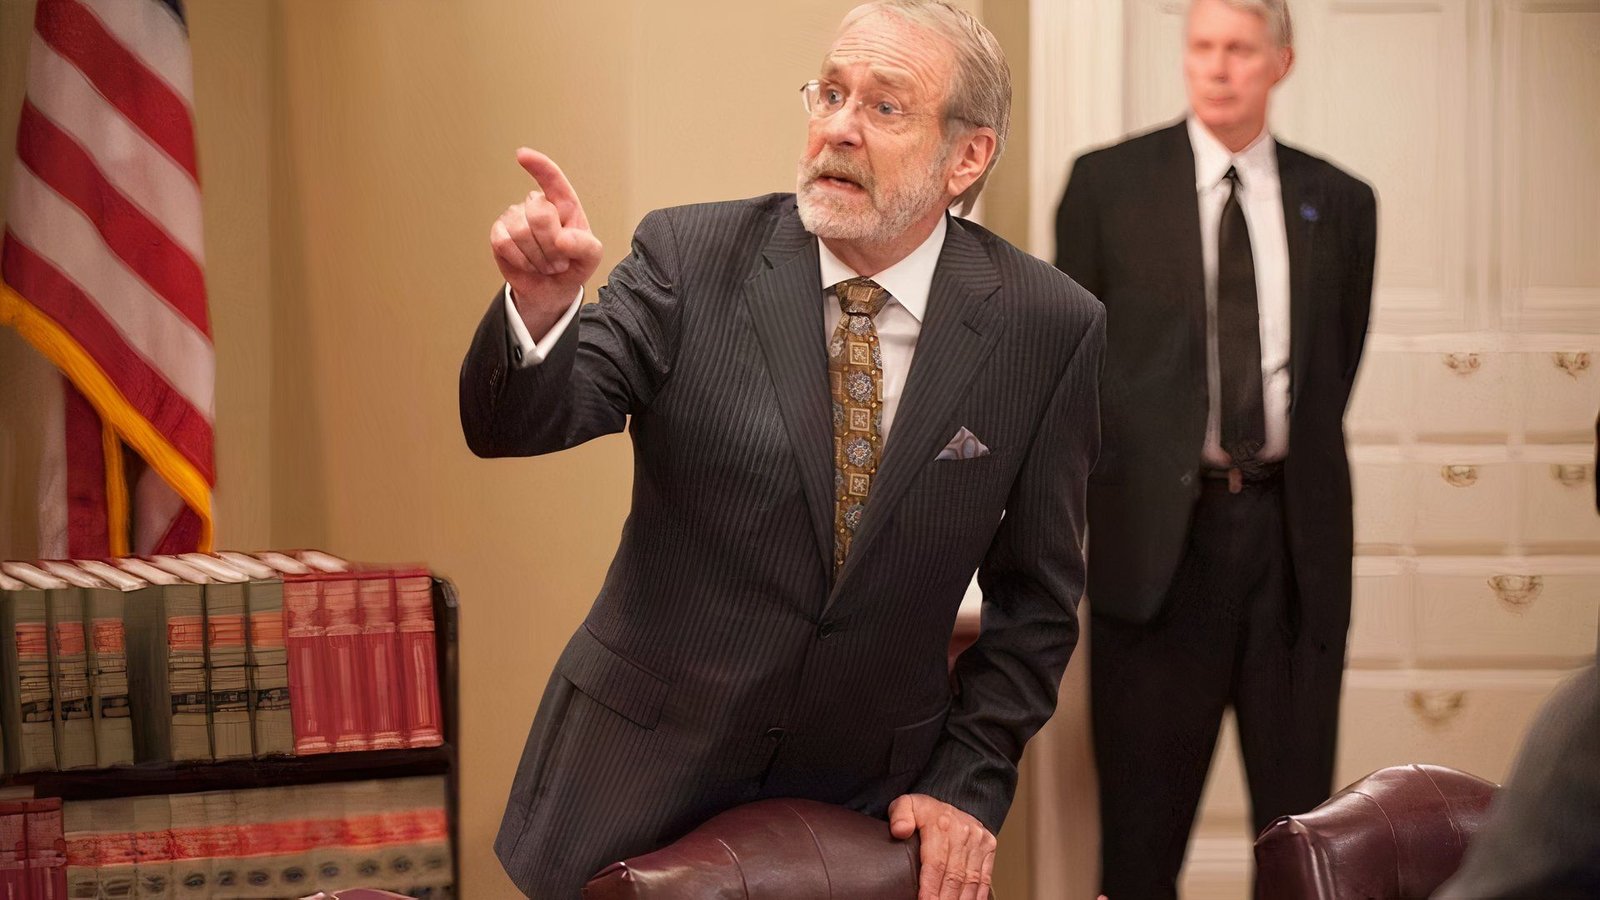 Martin Mull Finally Got His Emmy Nomination with Veep and Deserved Many More